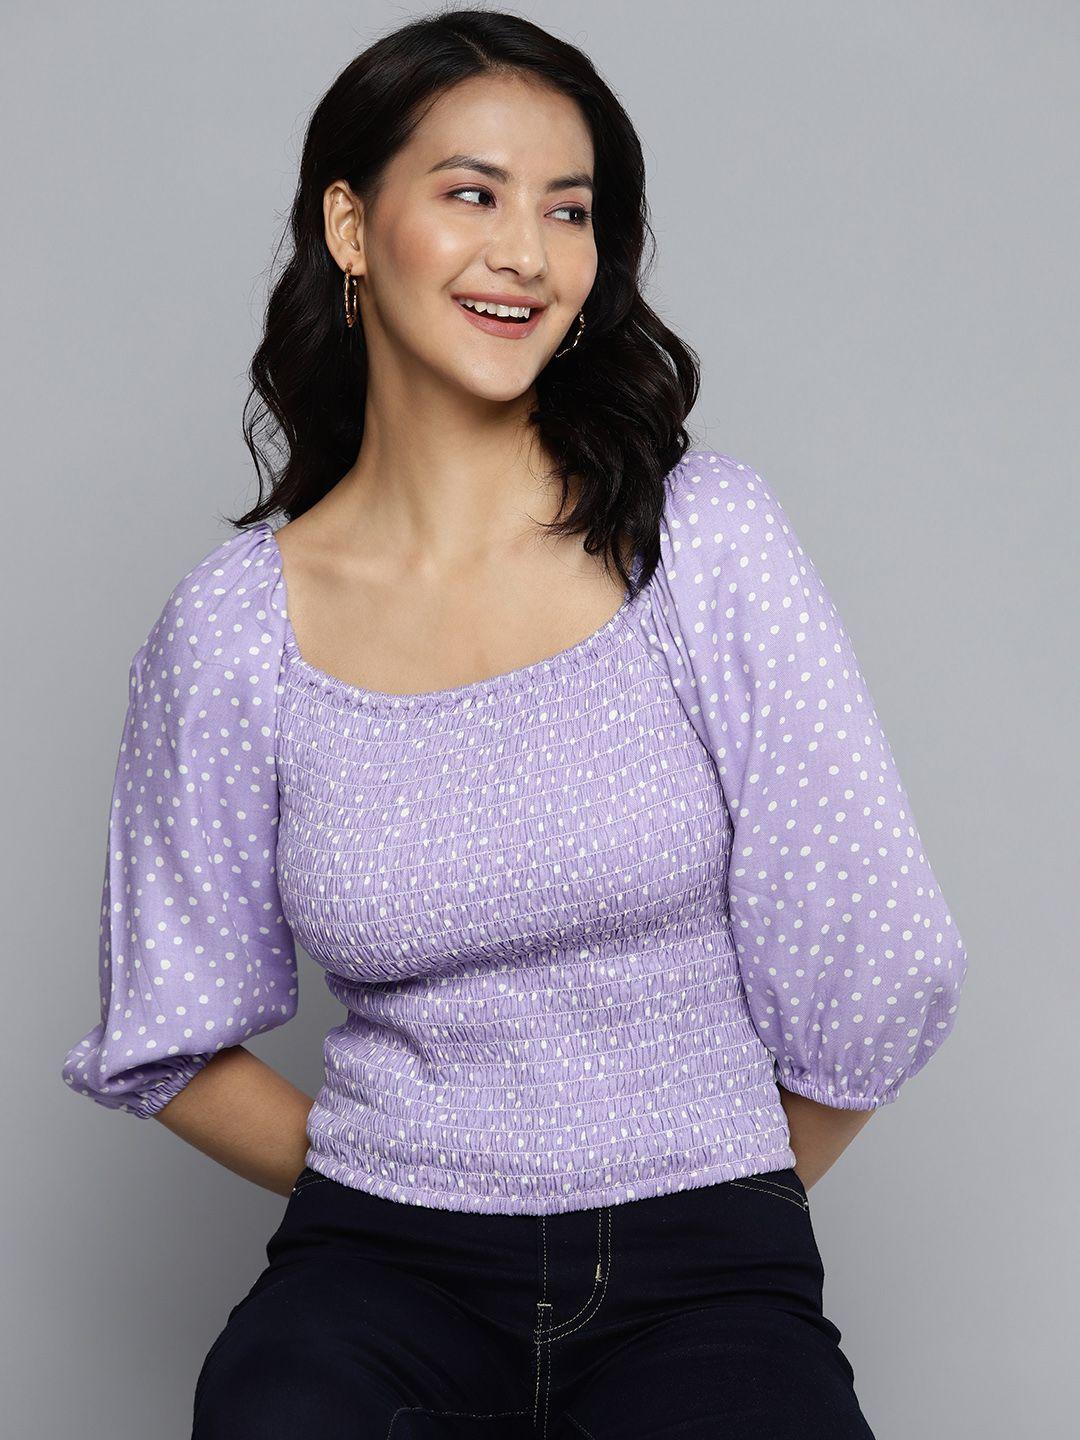 here&now-polka-dots-printed-smocking-top